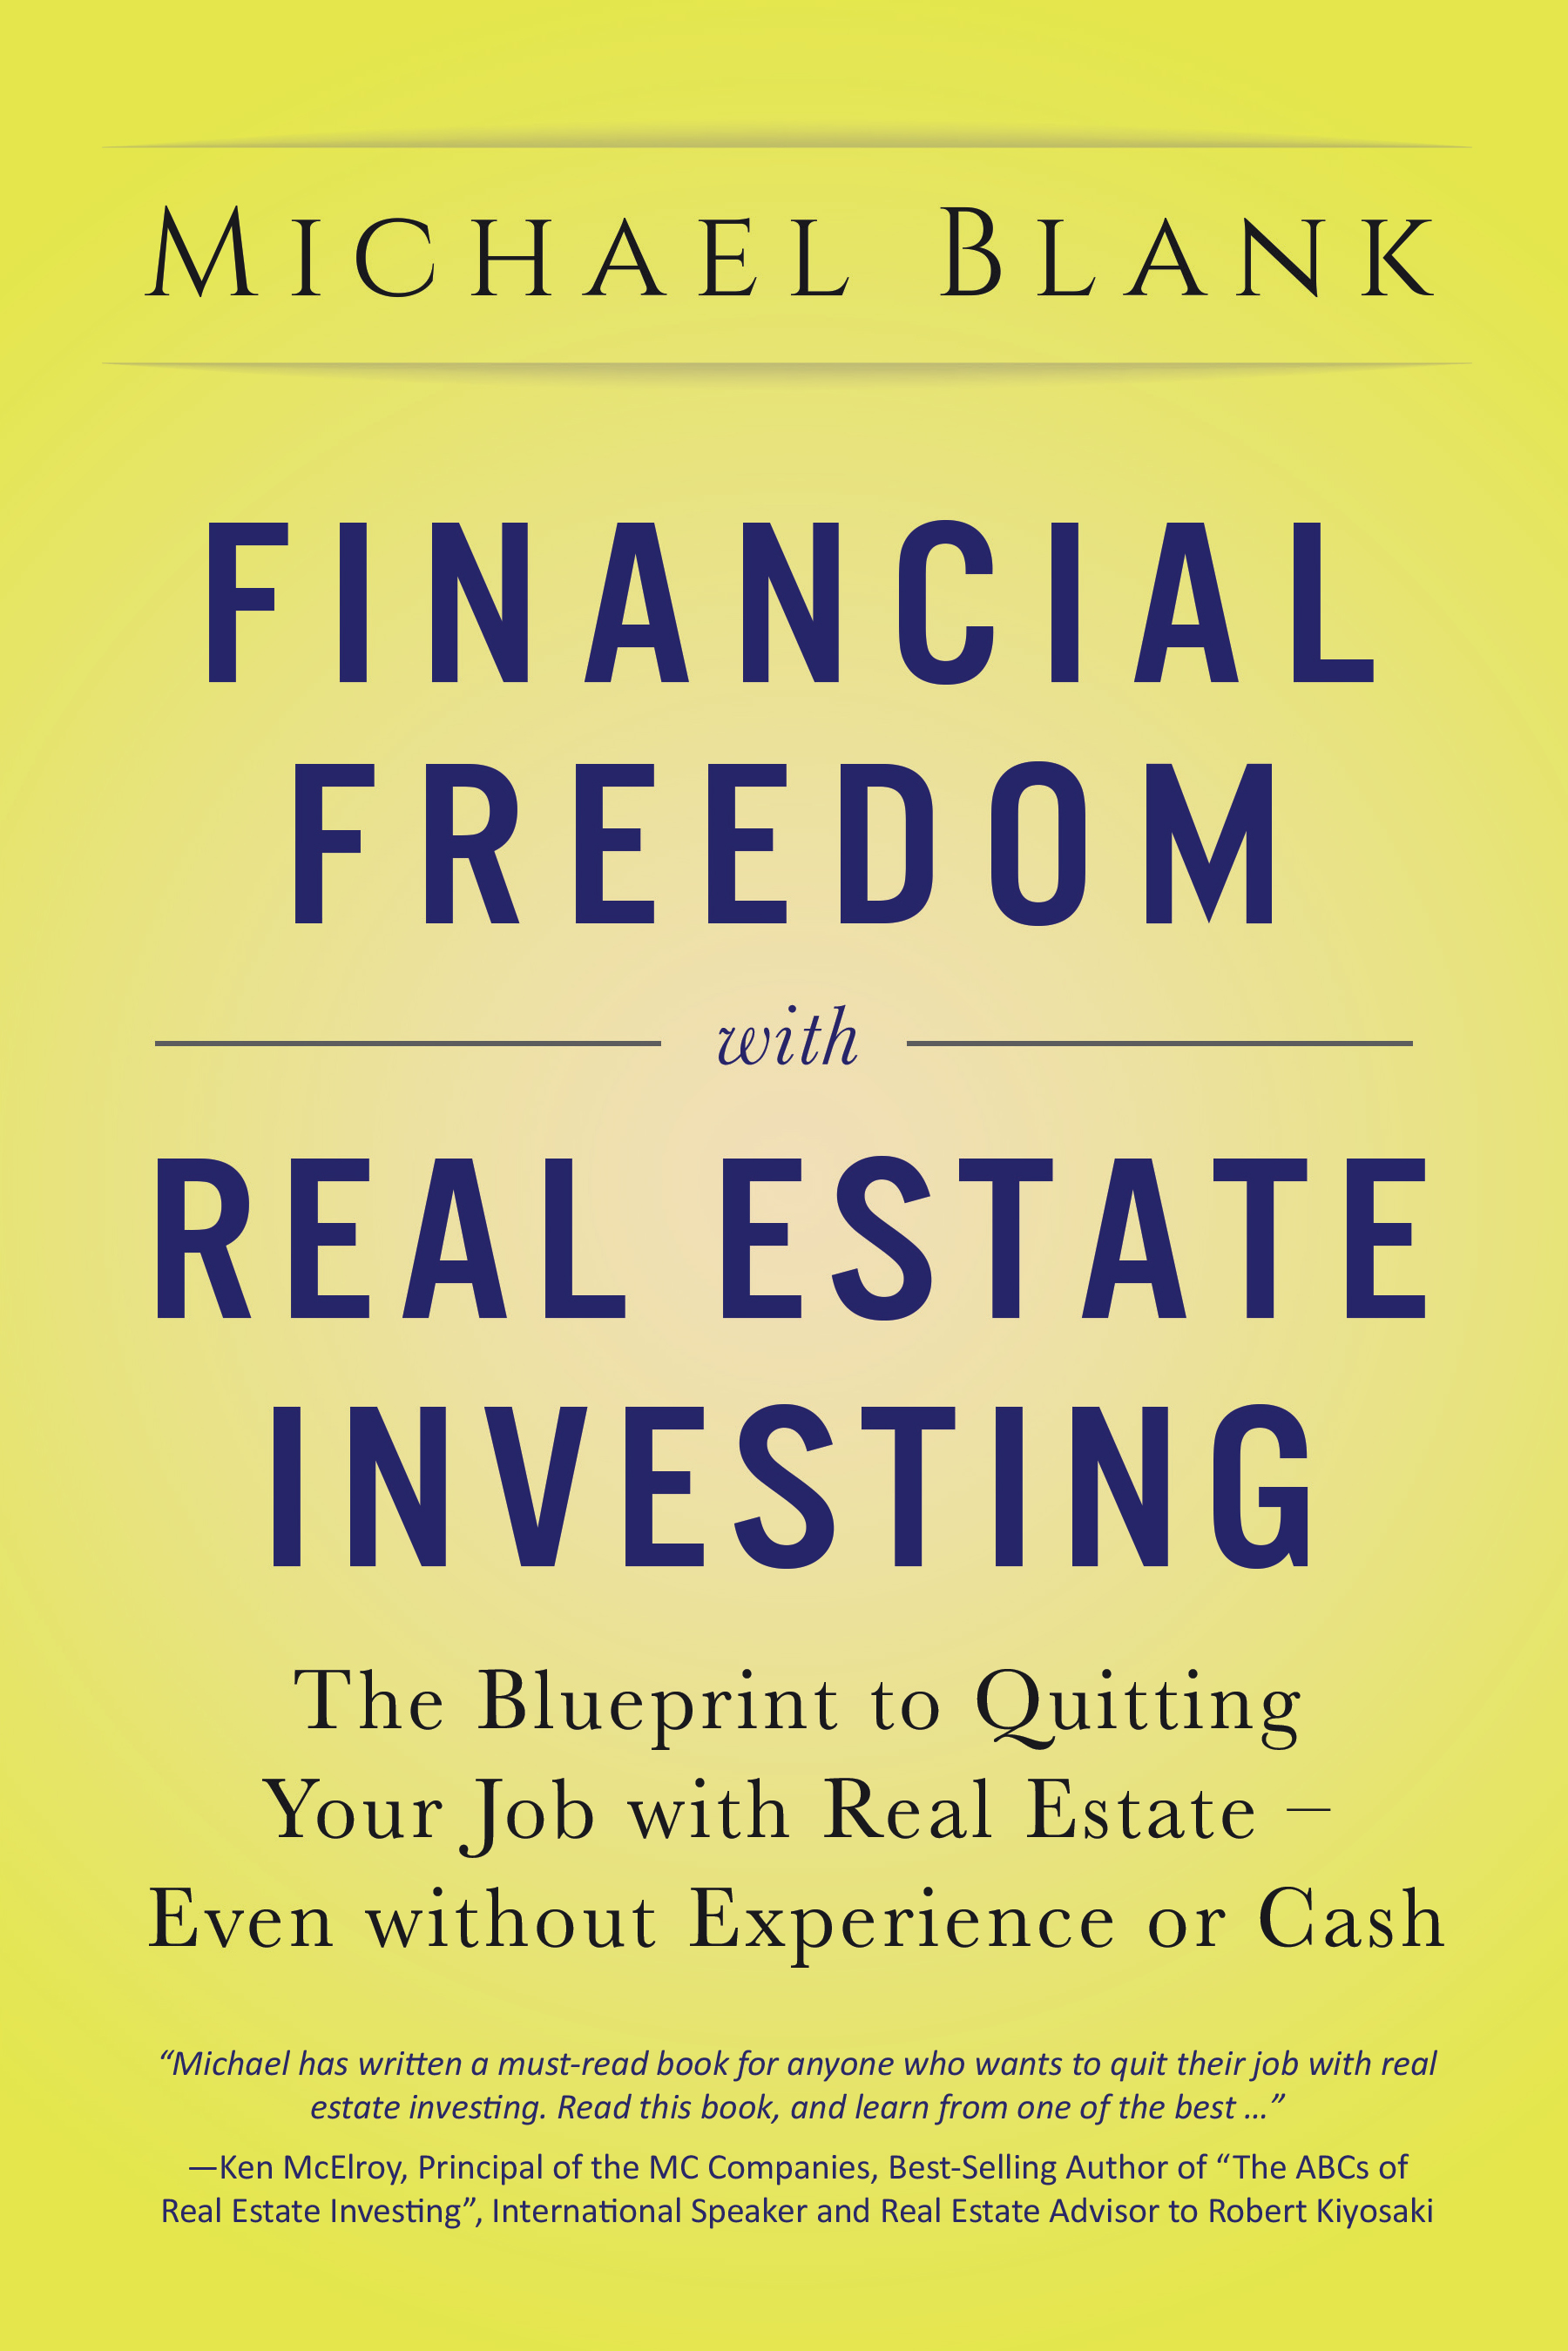 Michael Blank Releases New Book Financial Freedom with Real Estate